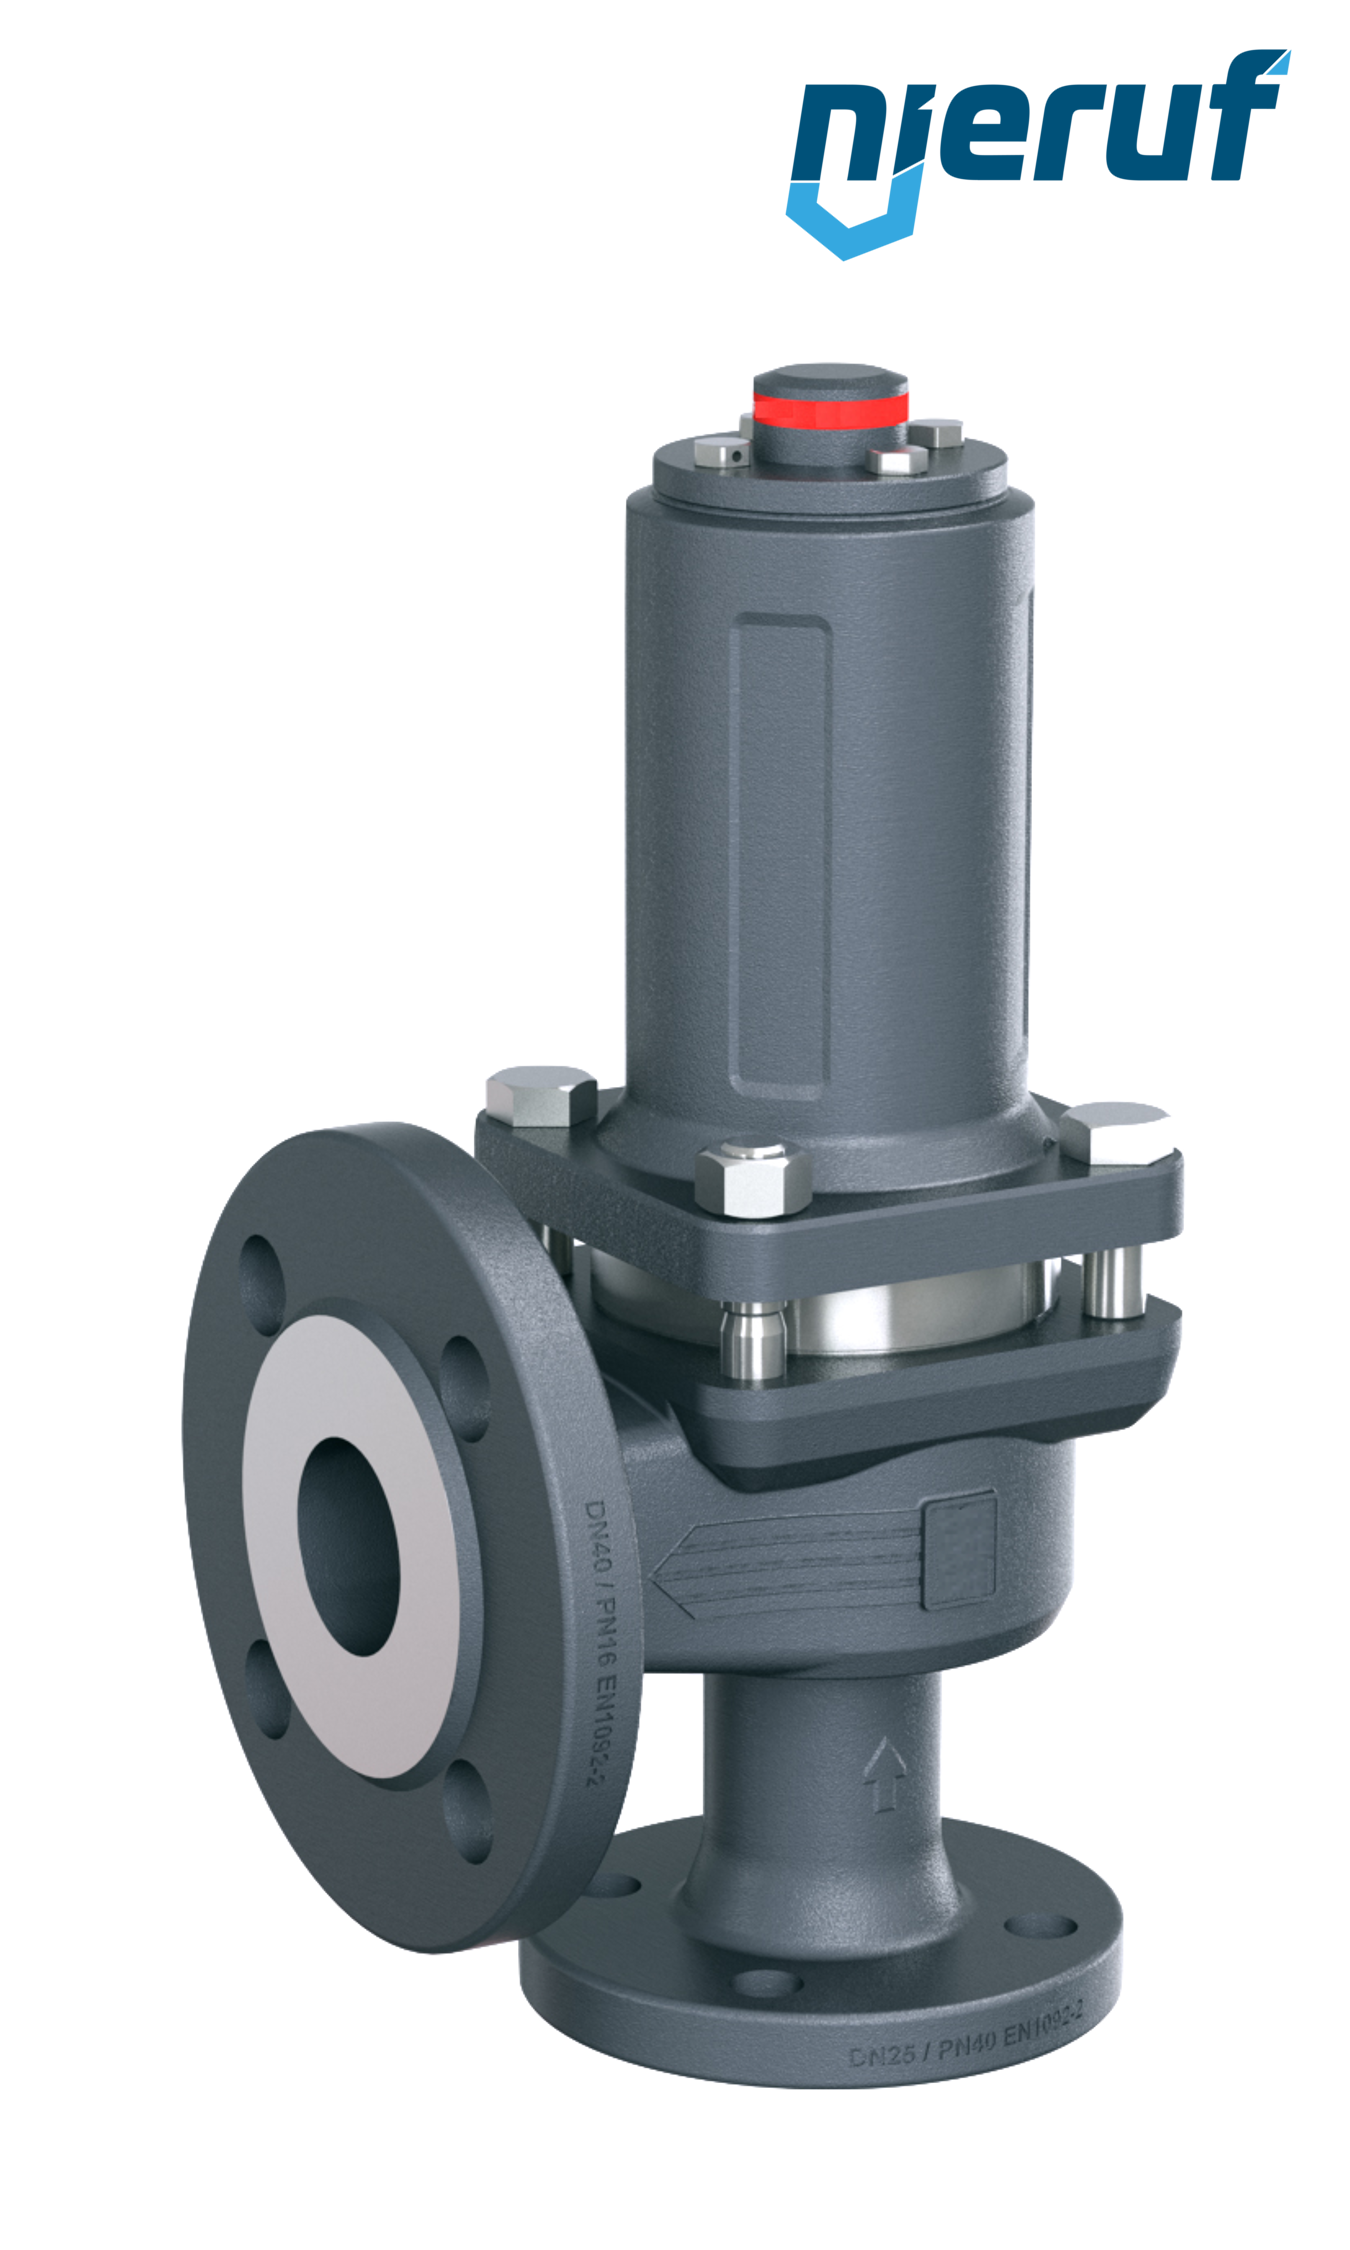 flange-safety valve DN65/DN100 SF06, gastight bonnet EPDM, without lifting device